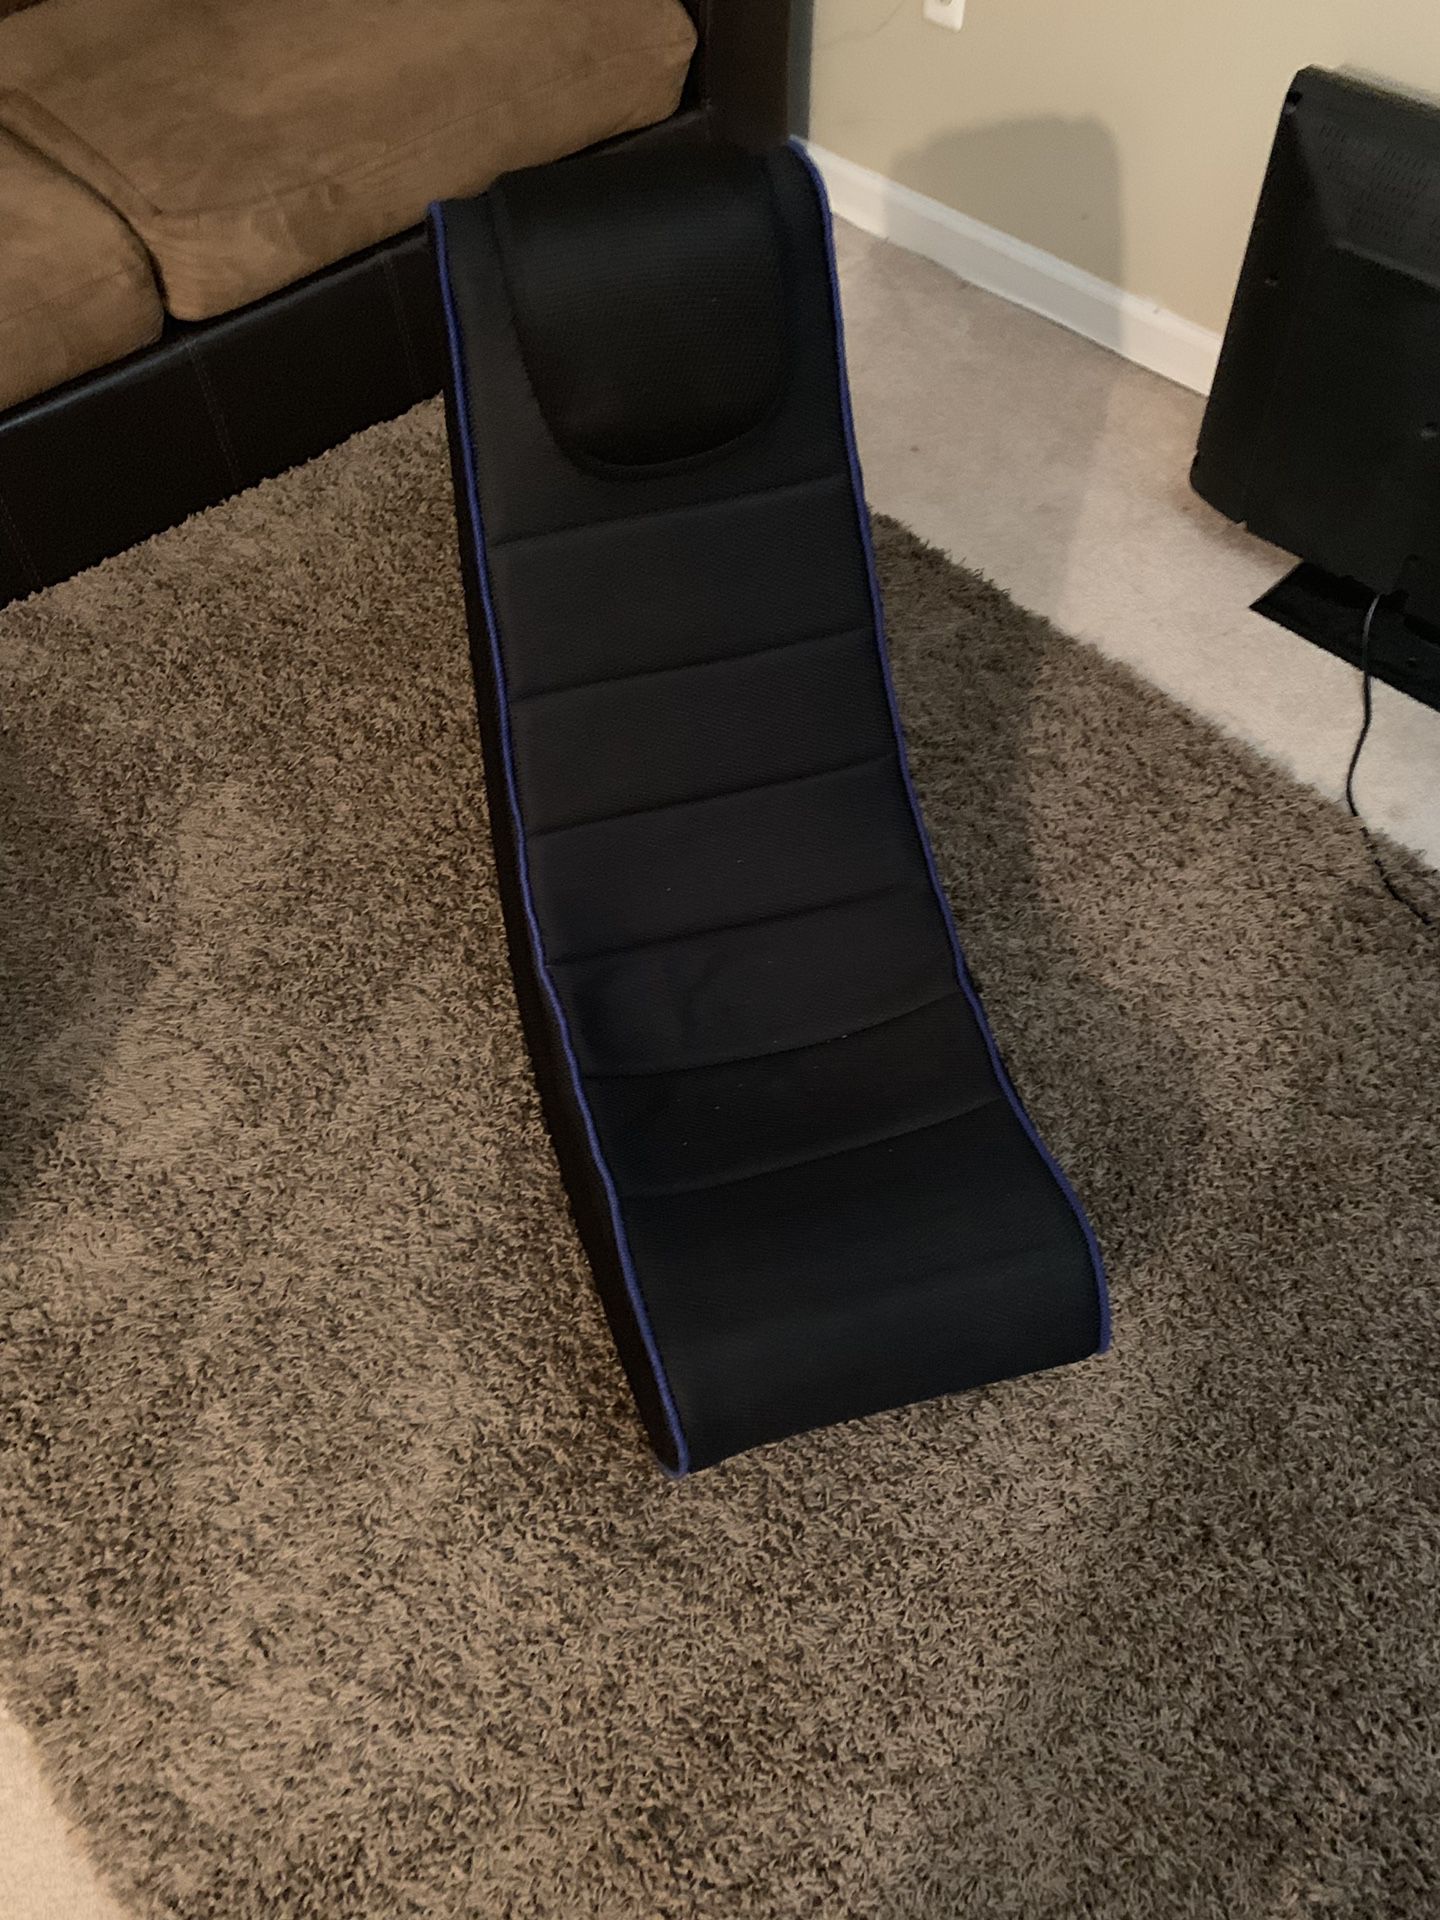 Game chair Black with Blue Stitching